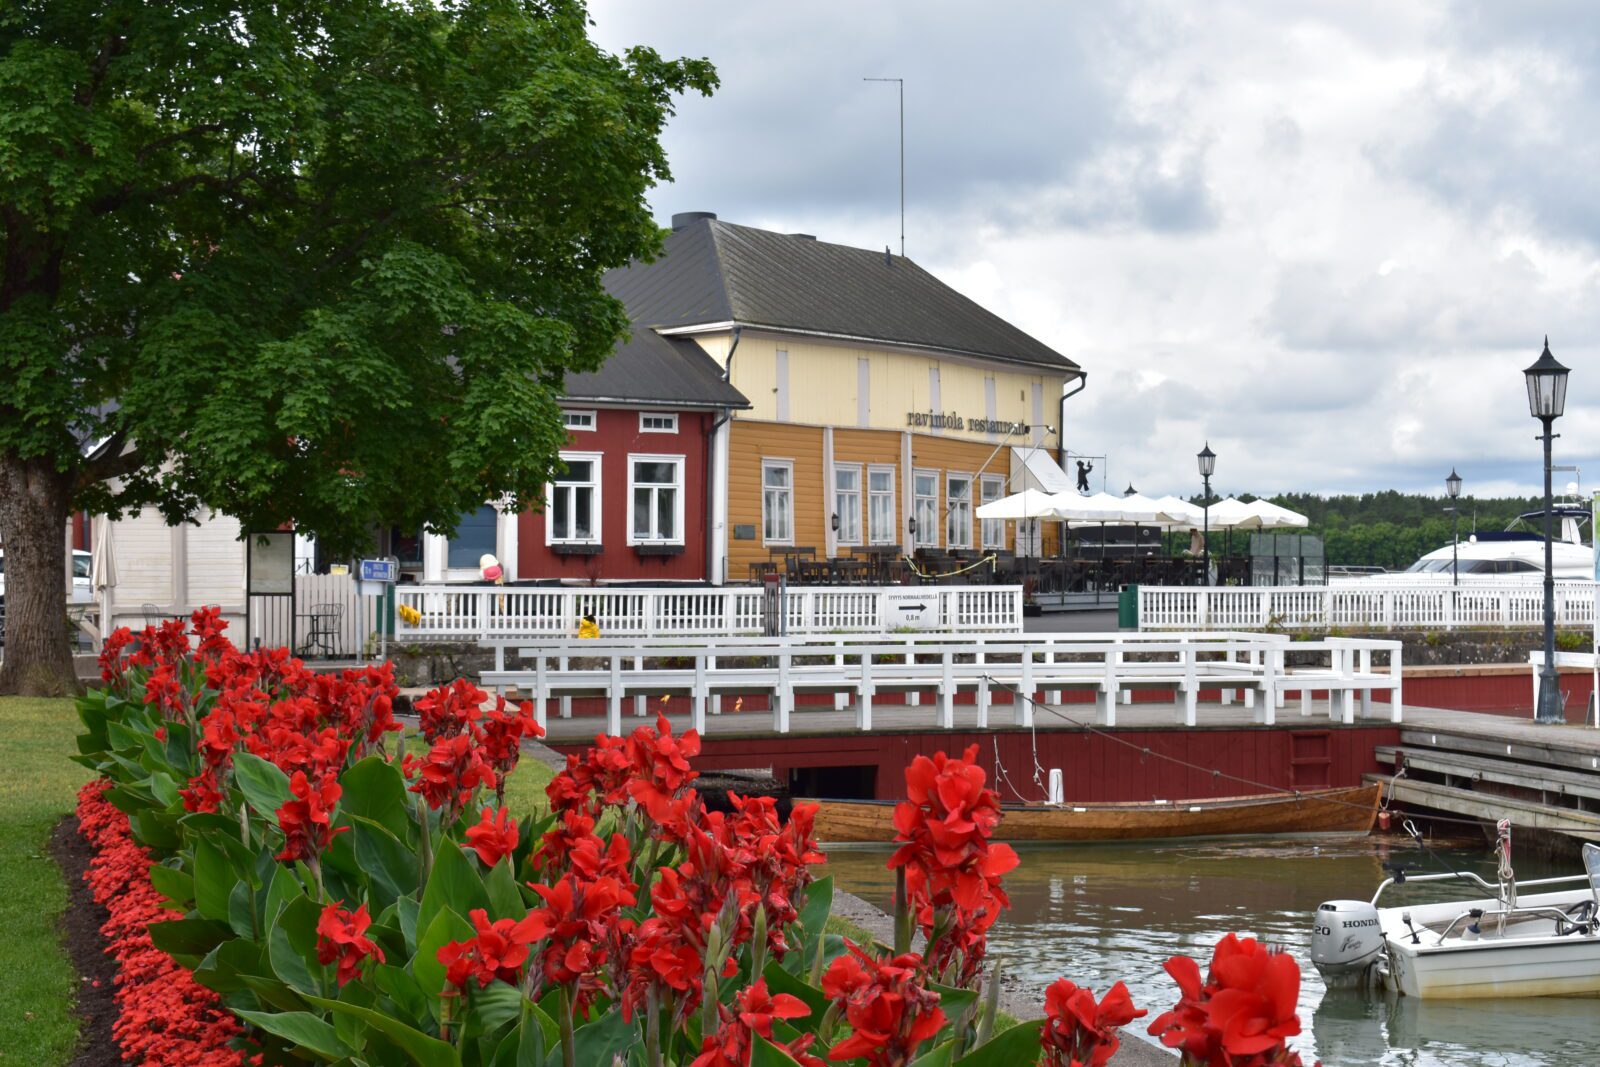 Naantali old town is summer.